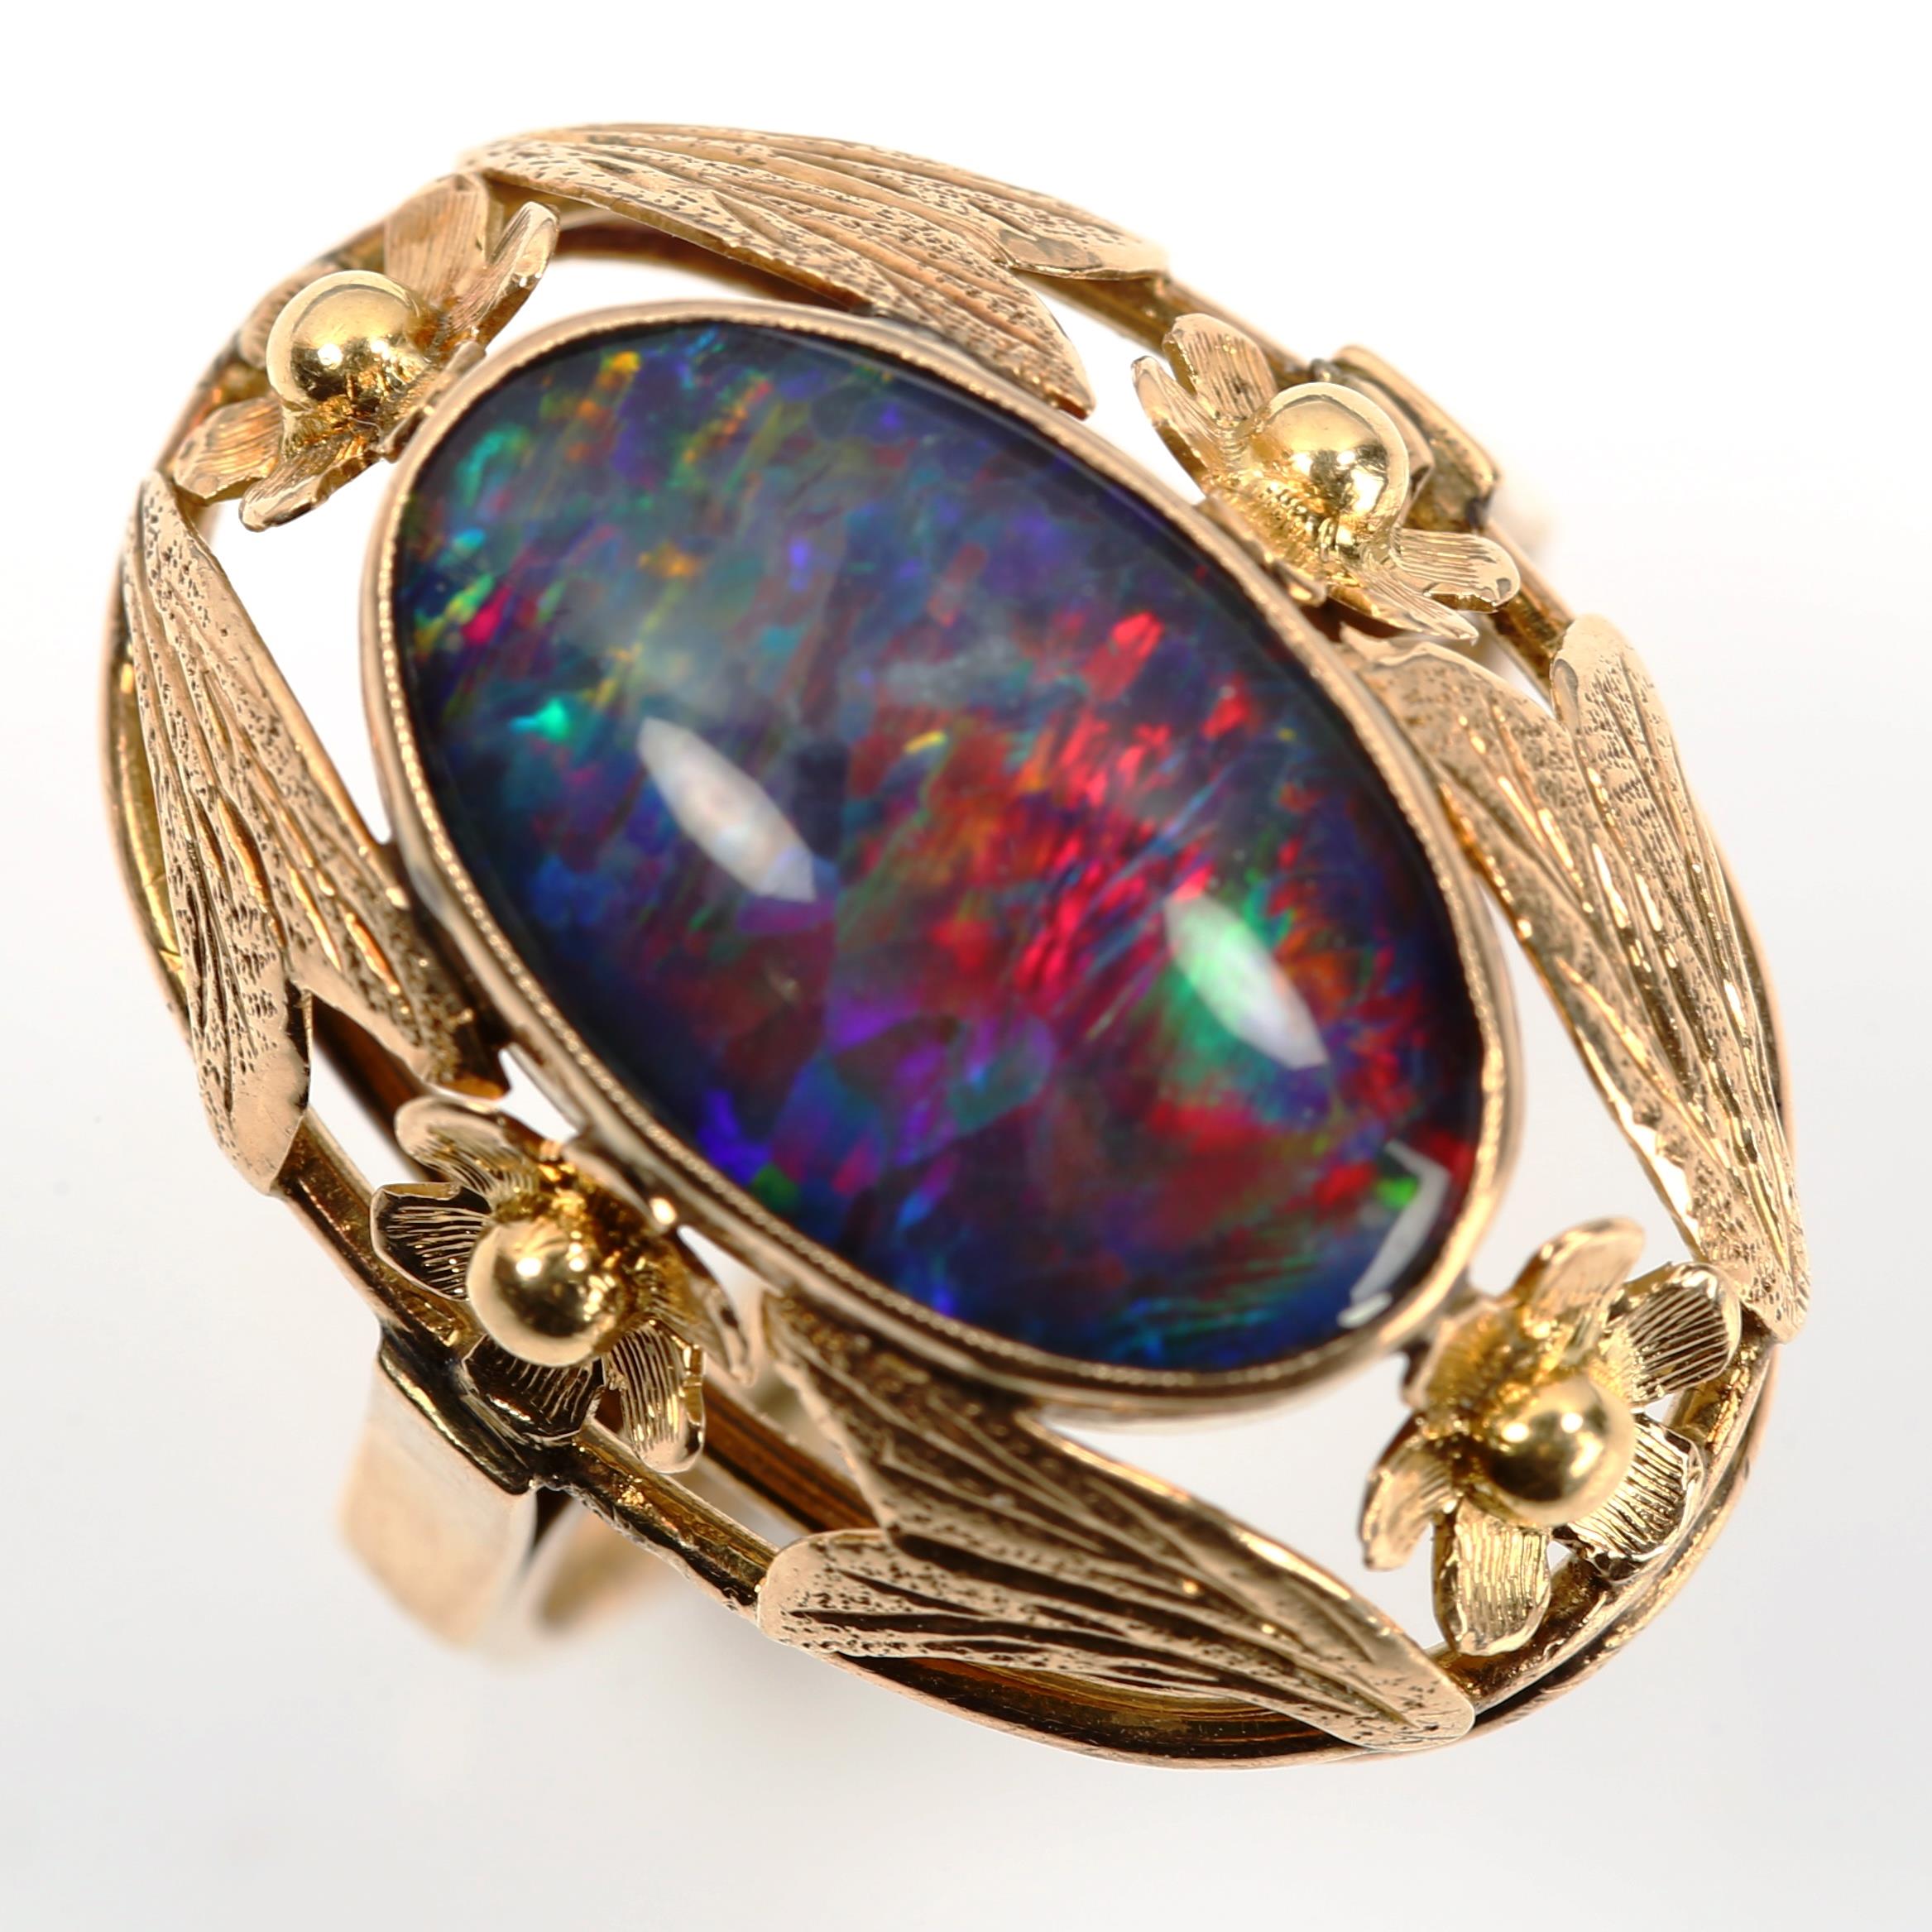 A large Continental black opal doublet dress ring, unmarked gold settings with floral bezel, setting